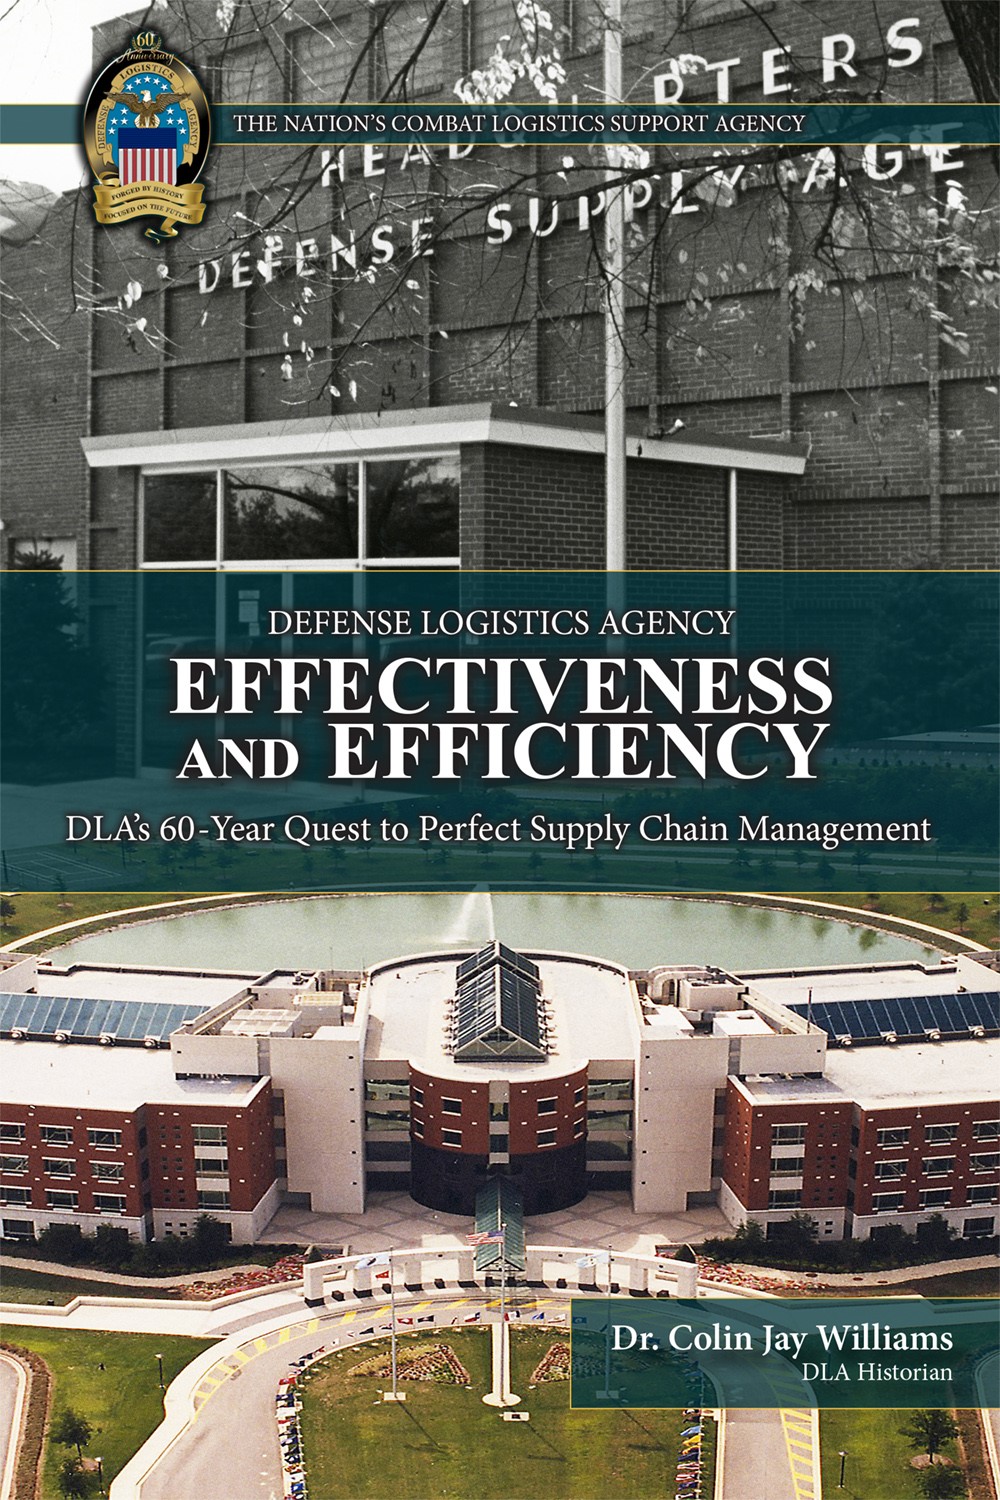 Cover image for the Effectiveness and Efficiency document showing DLA's former and current headquarters buildings